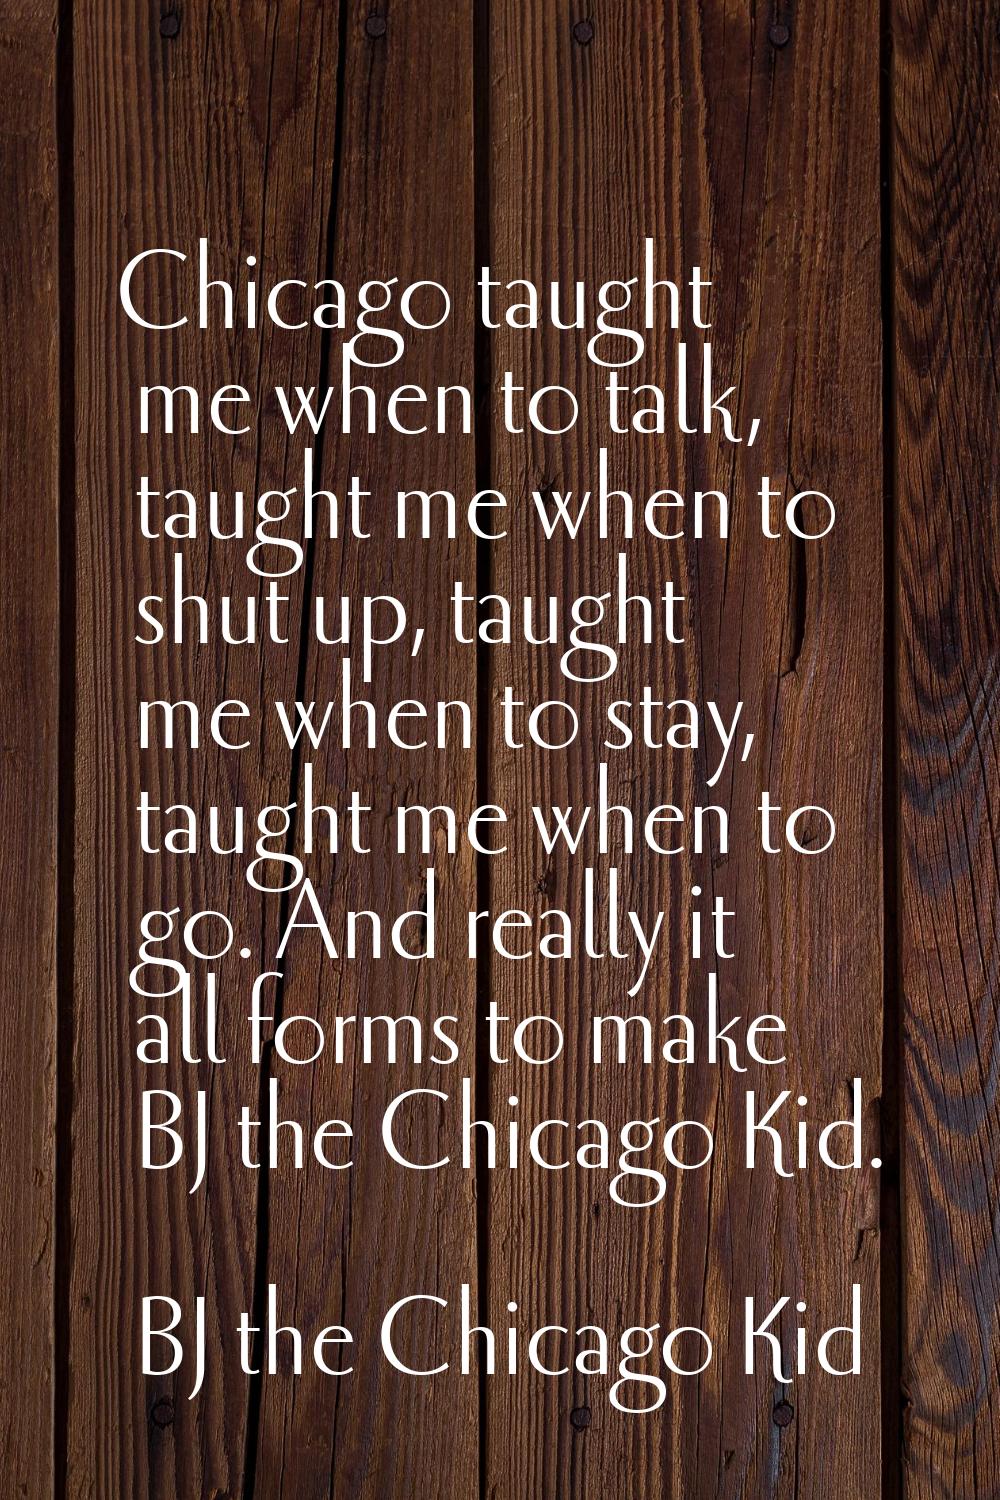 Chicago taught me when to talk, taught me when to shut up, taught me when to stay, taught me when t